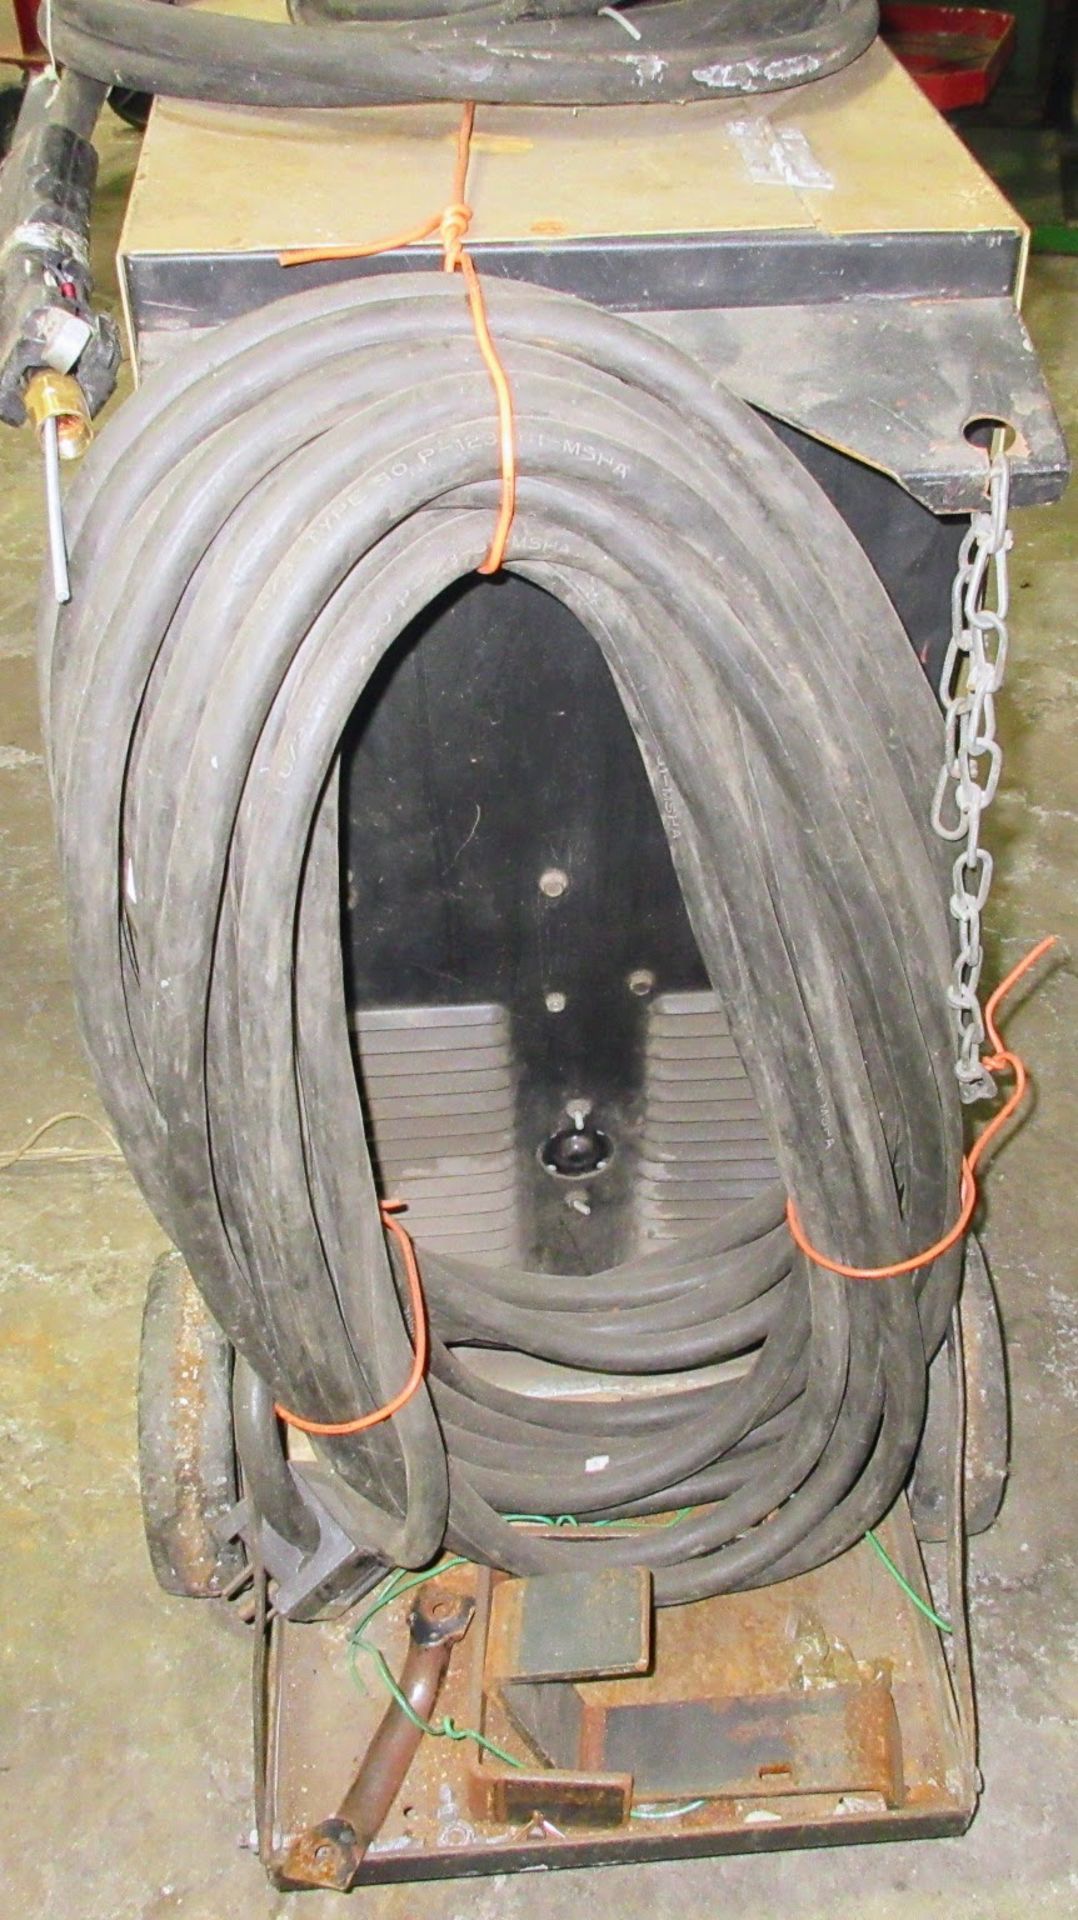 HOBART BETA-MIG II WELDER W/ CART AND CABLES - Image 4 of 4